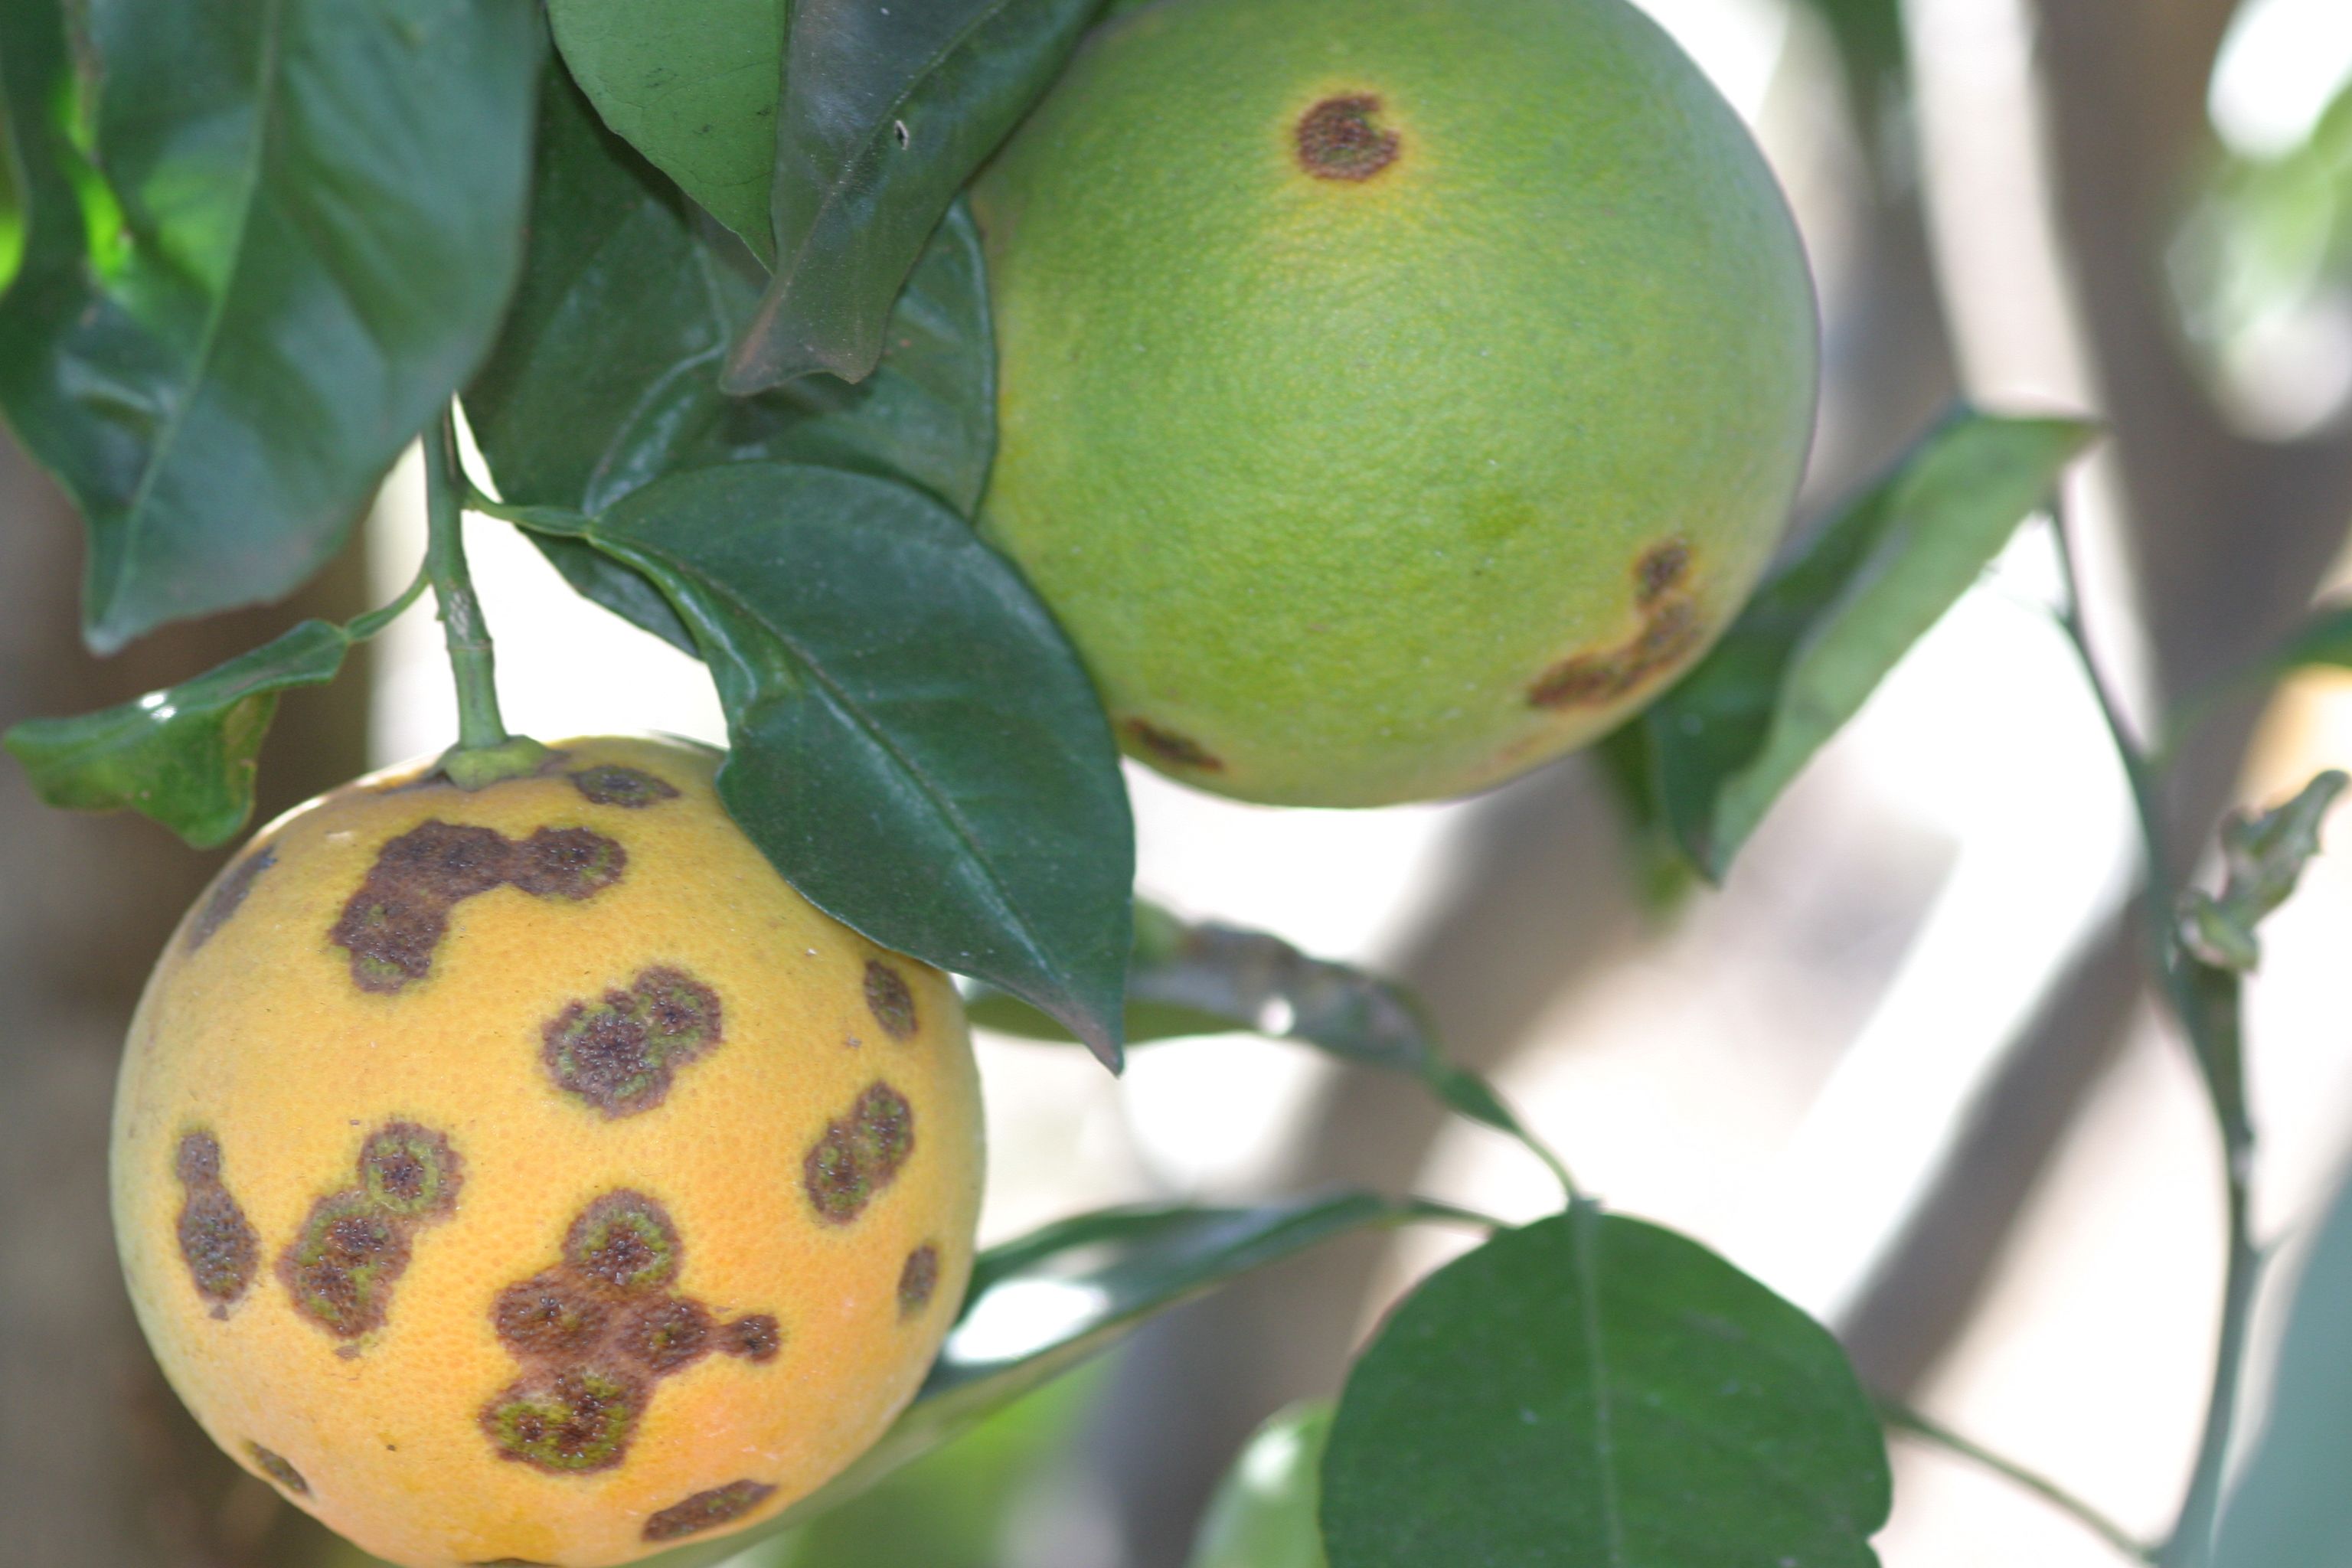 Concentric green rings within lesions on immature and mature fruit.